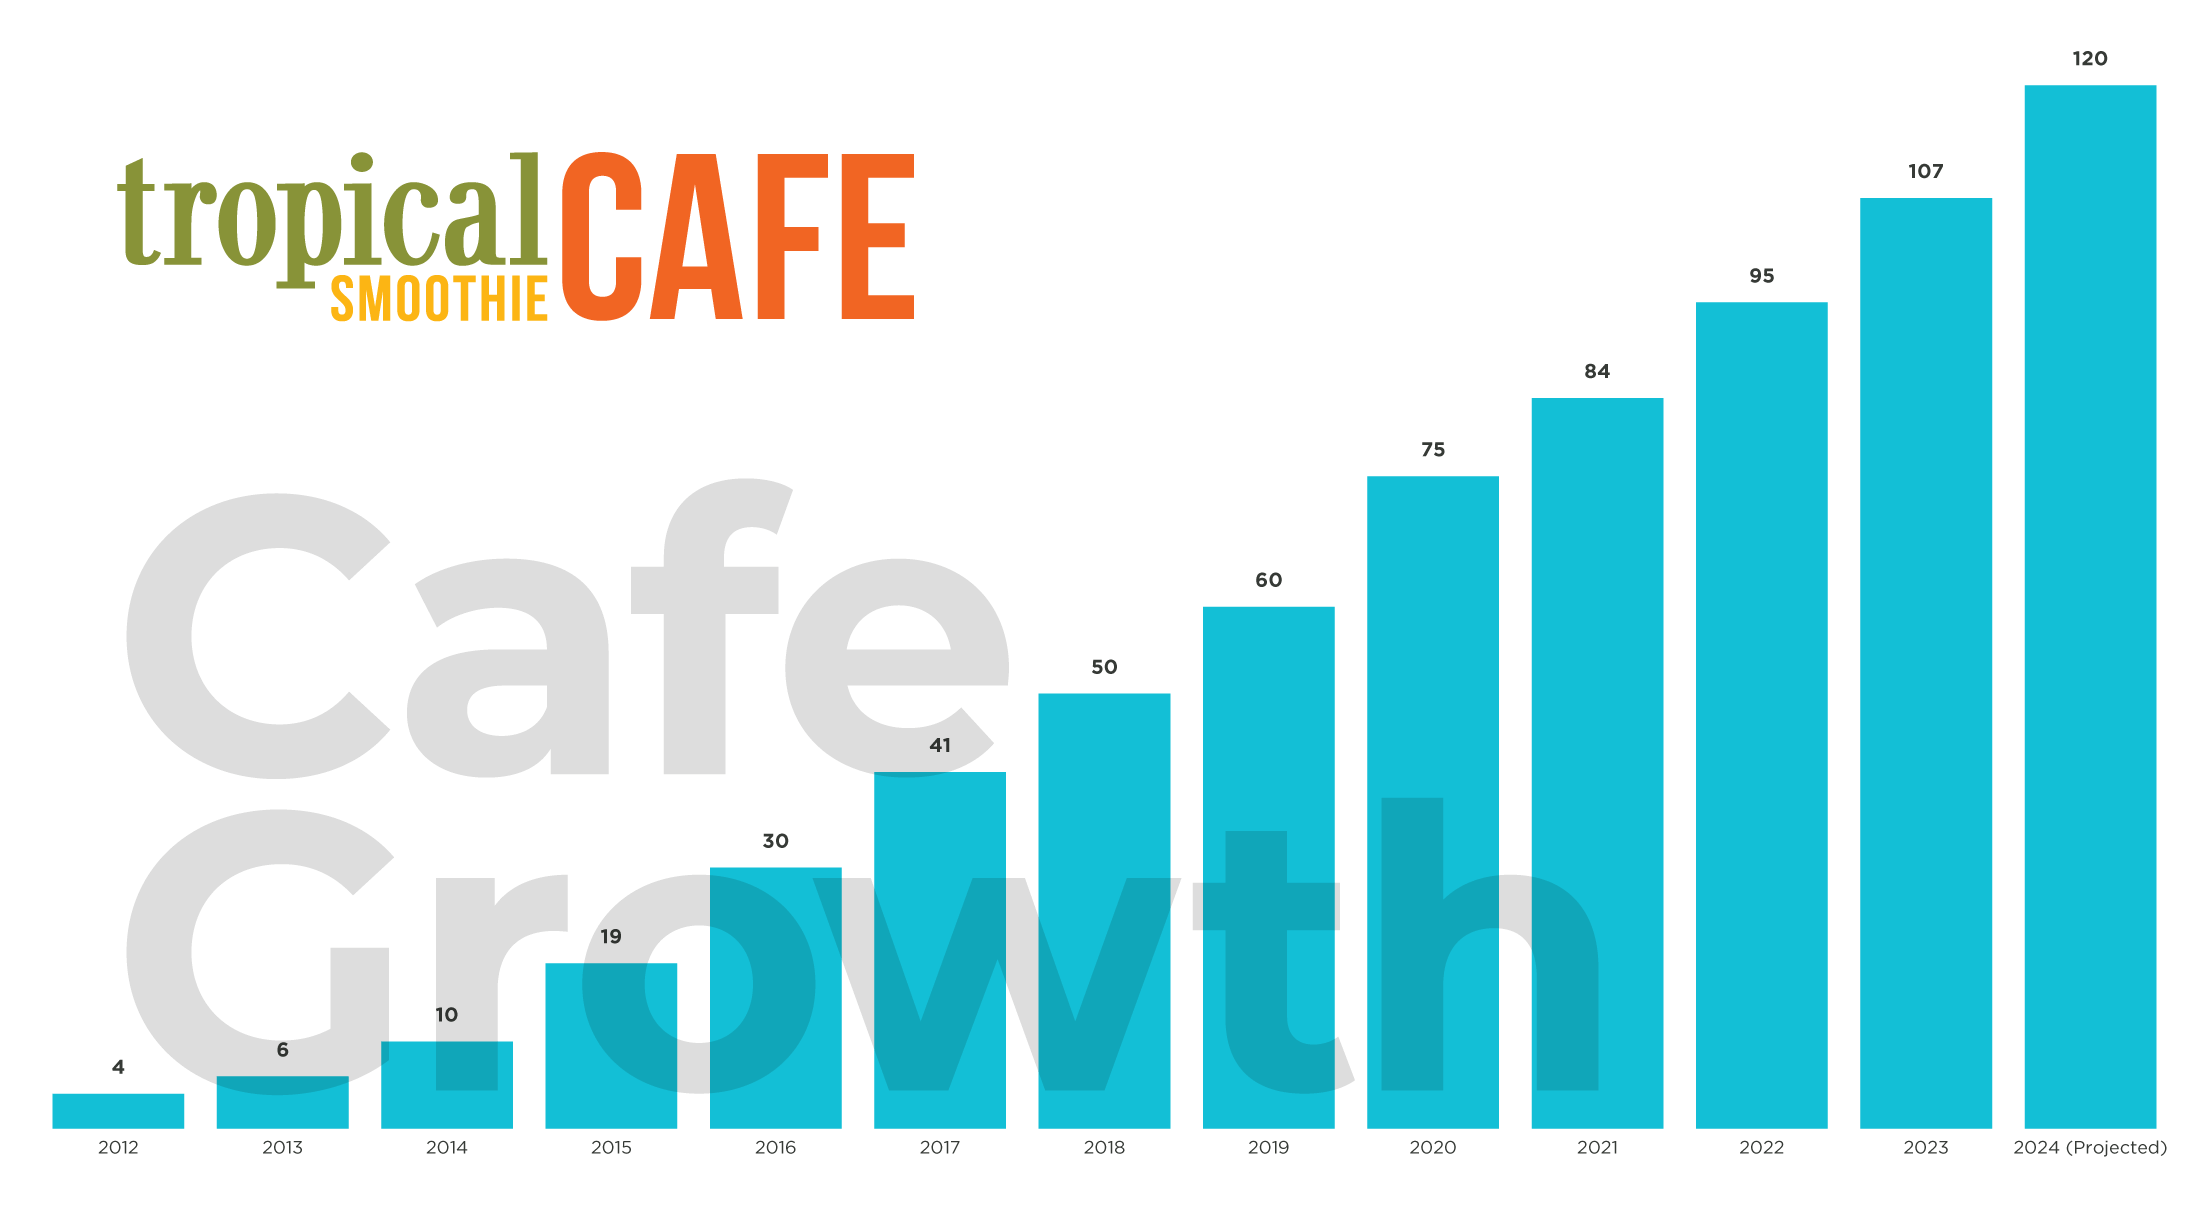 Bar Chart Showing Consistent Cafe Growth from 2023 Through 2024 Projected